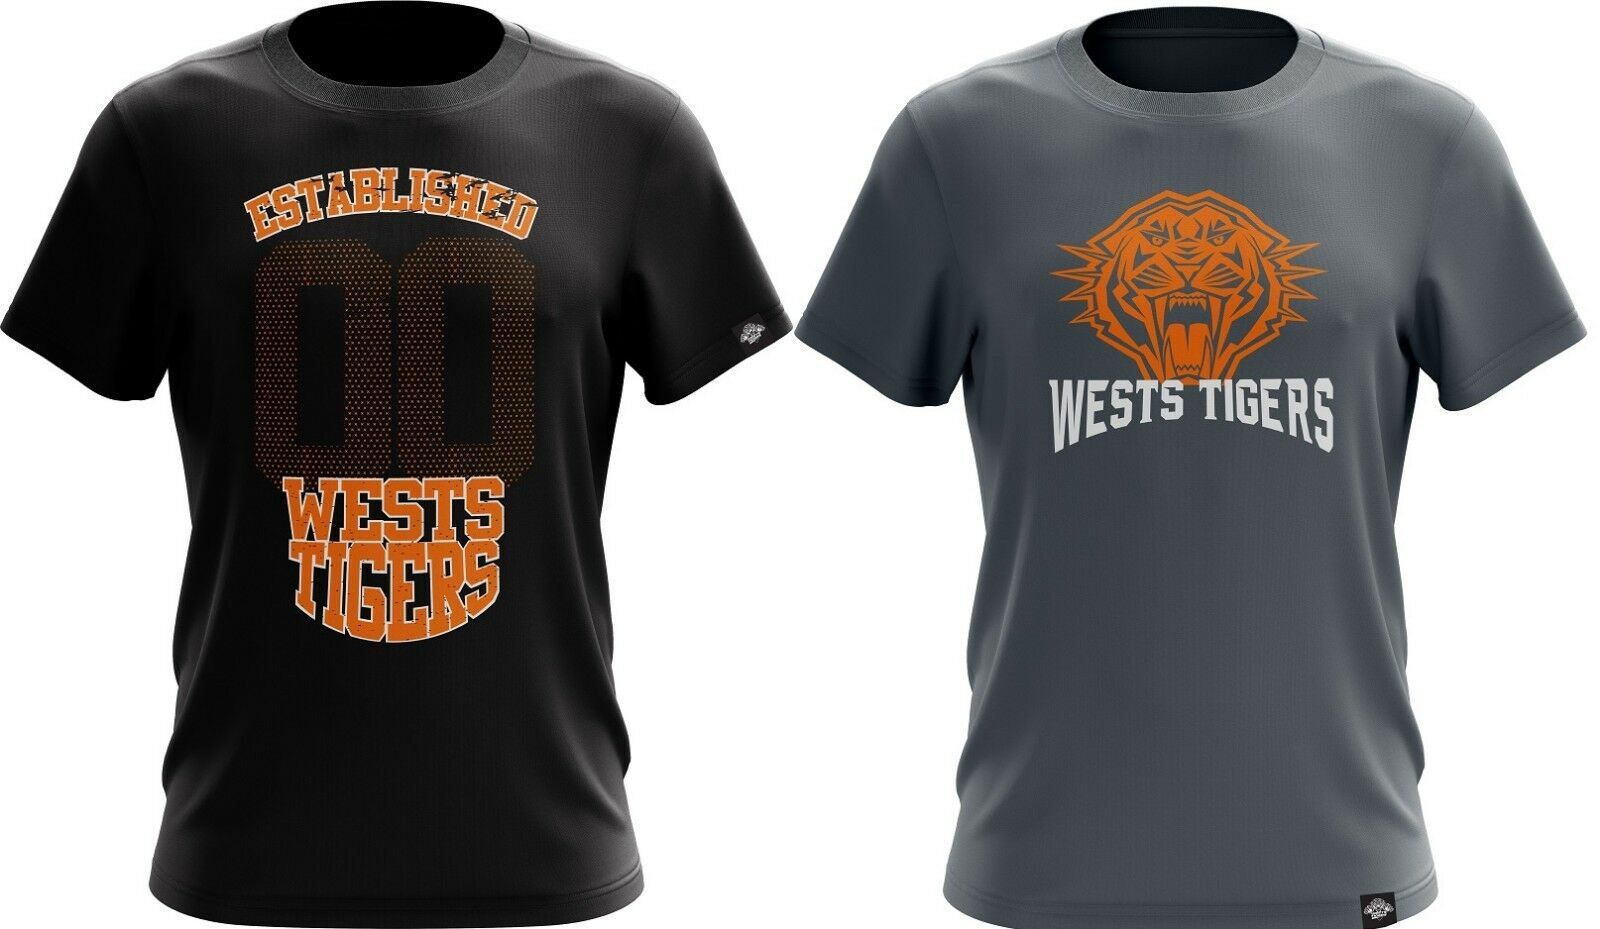 Wests Tigers NRL Twin T Shirts Adult Sizes Medium & 2XL ONLY! 